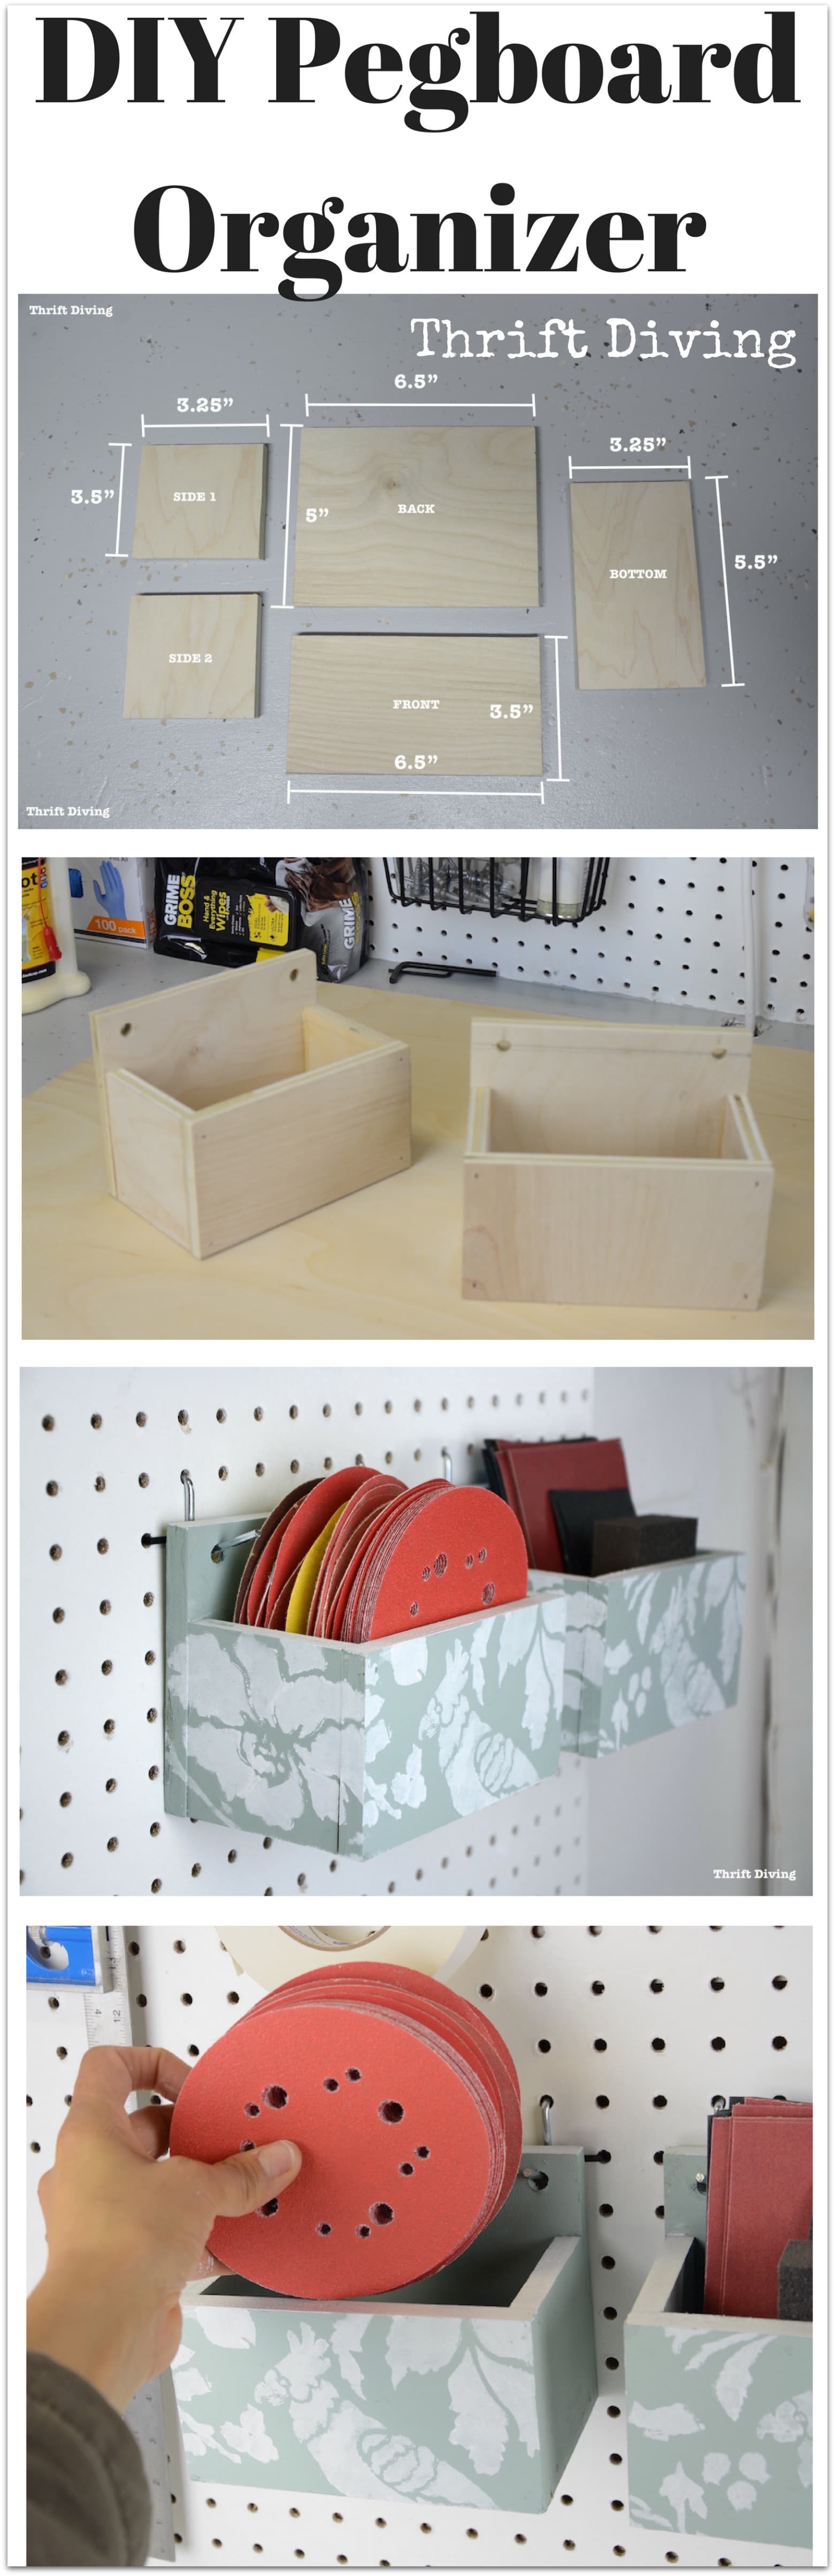 How to make a DIY pegboard organizer - Materials needed include 12 plywood, glue, and paint!